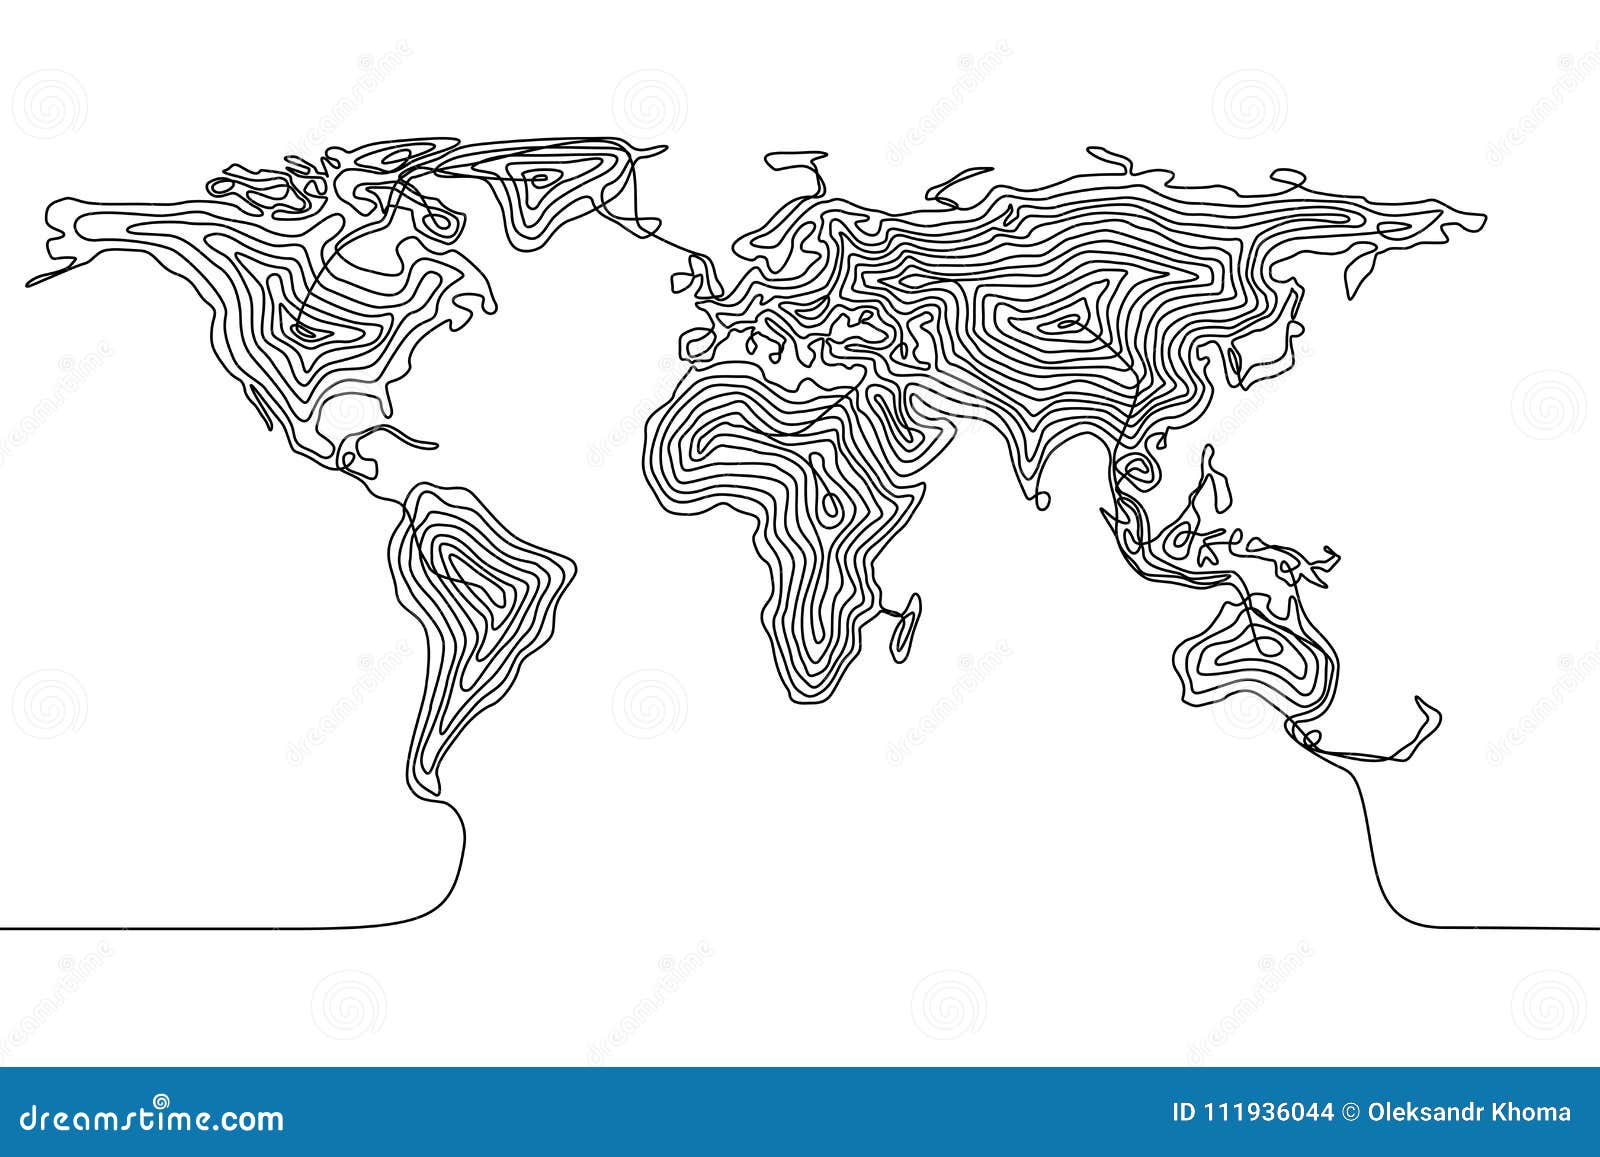 continuous line drawing of a world map, single line earth